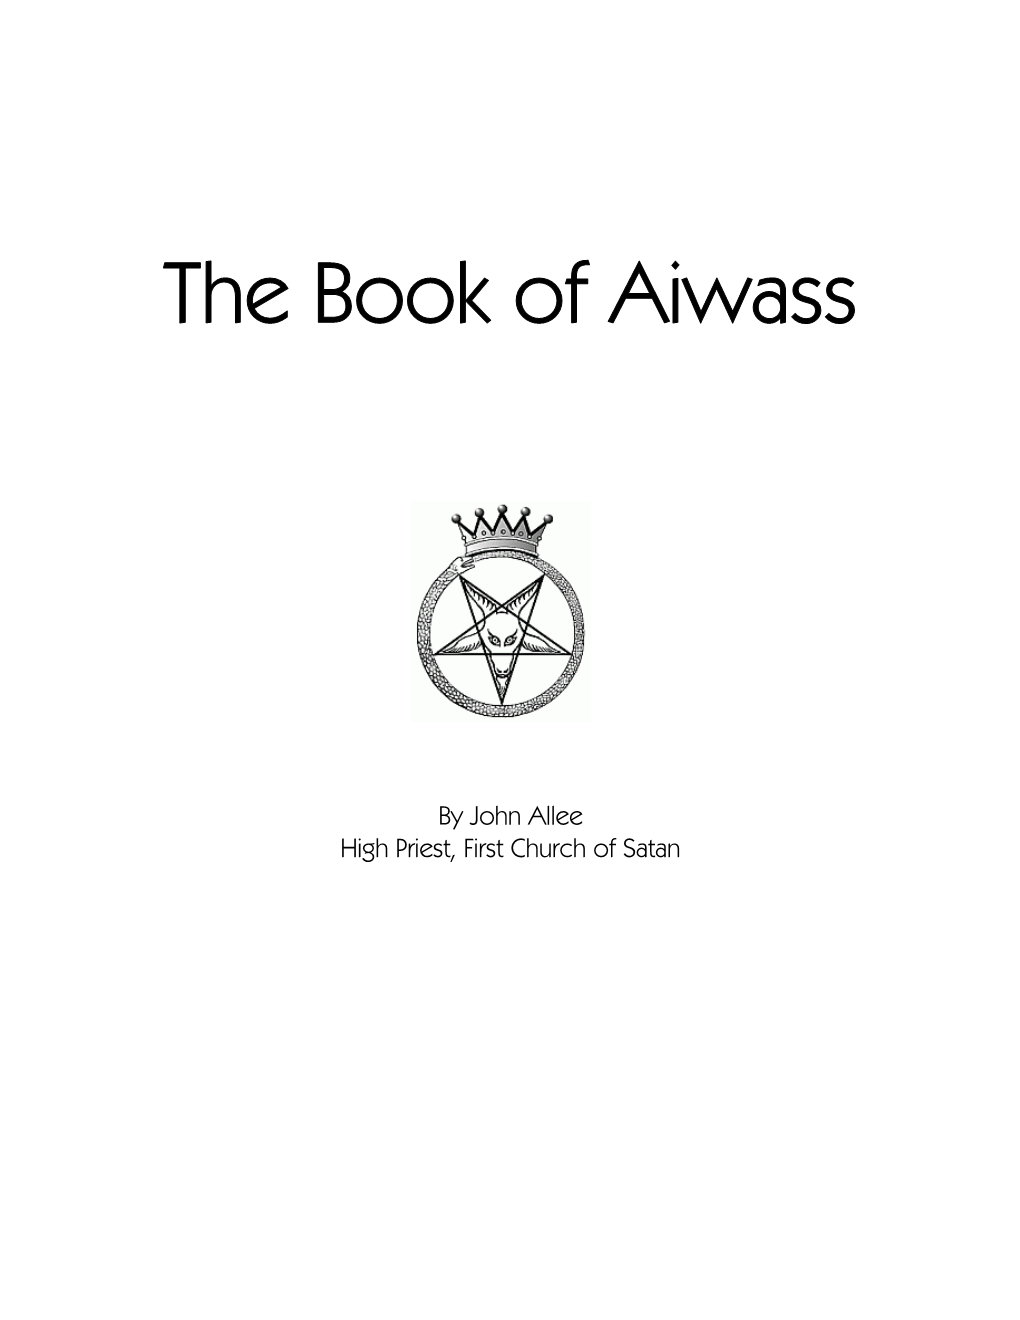 The Book of Aiwass